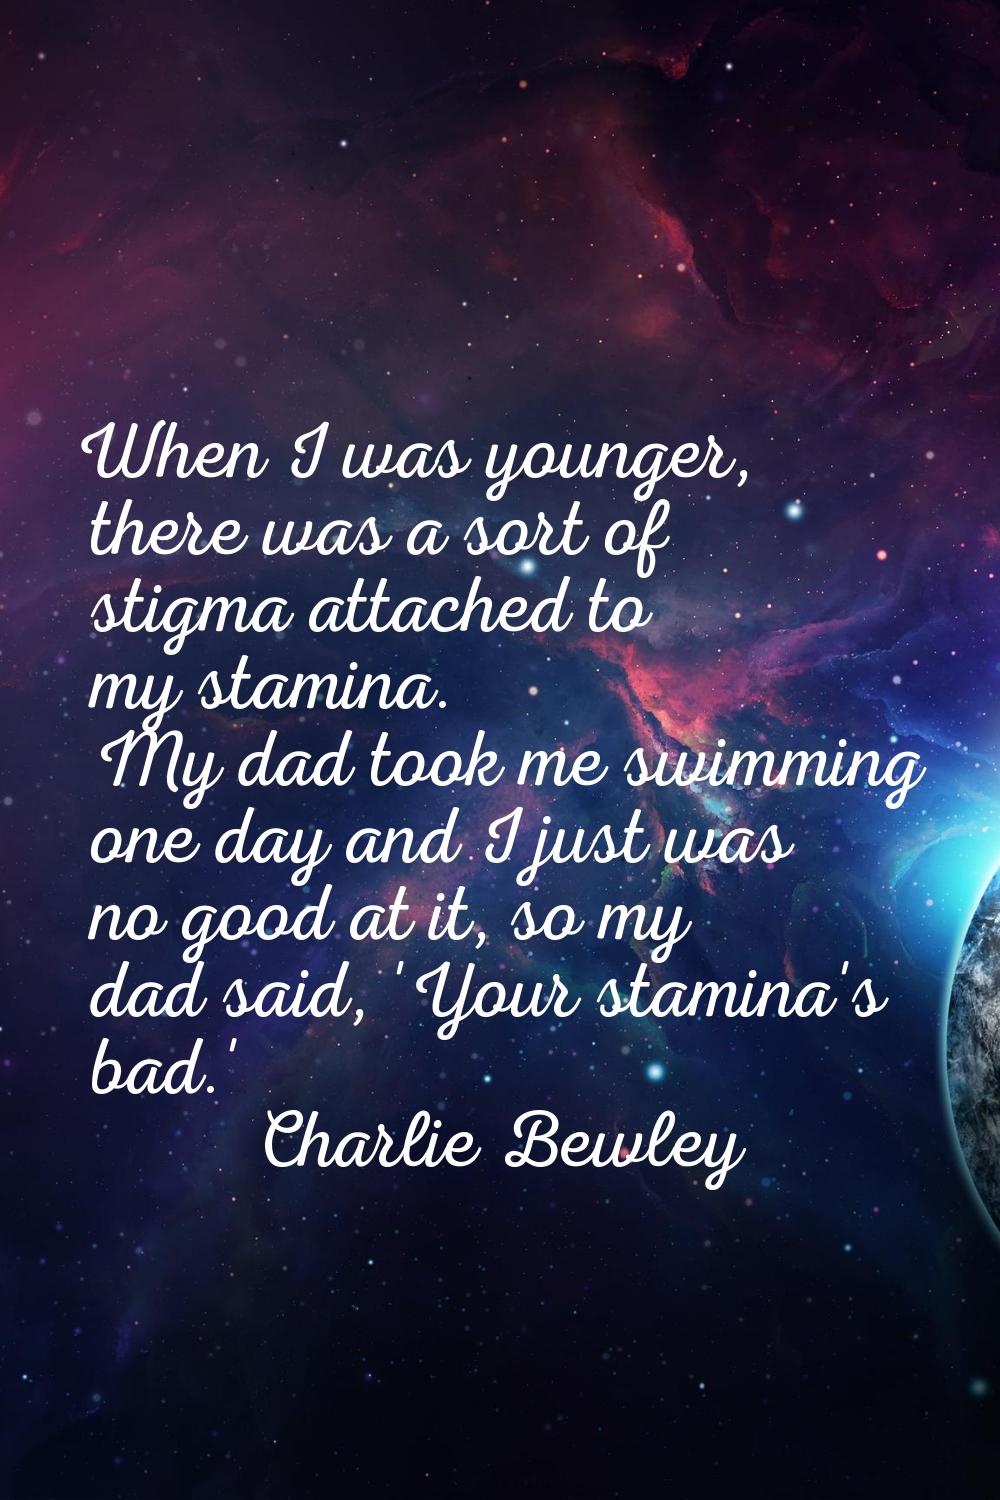 When I was younger, there was a sort of stigma attached to my stamina. My dad took me swimming one 